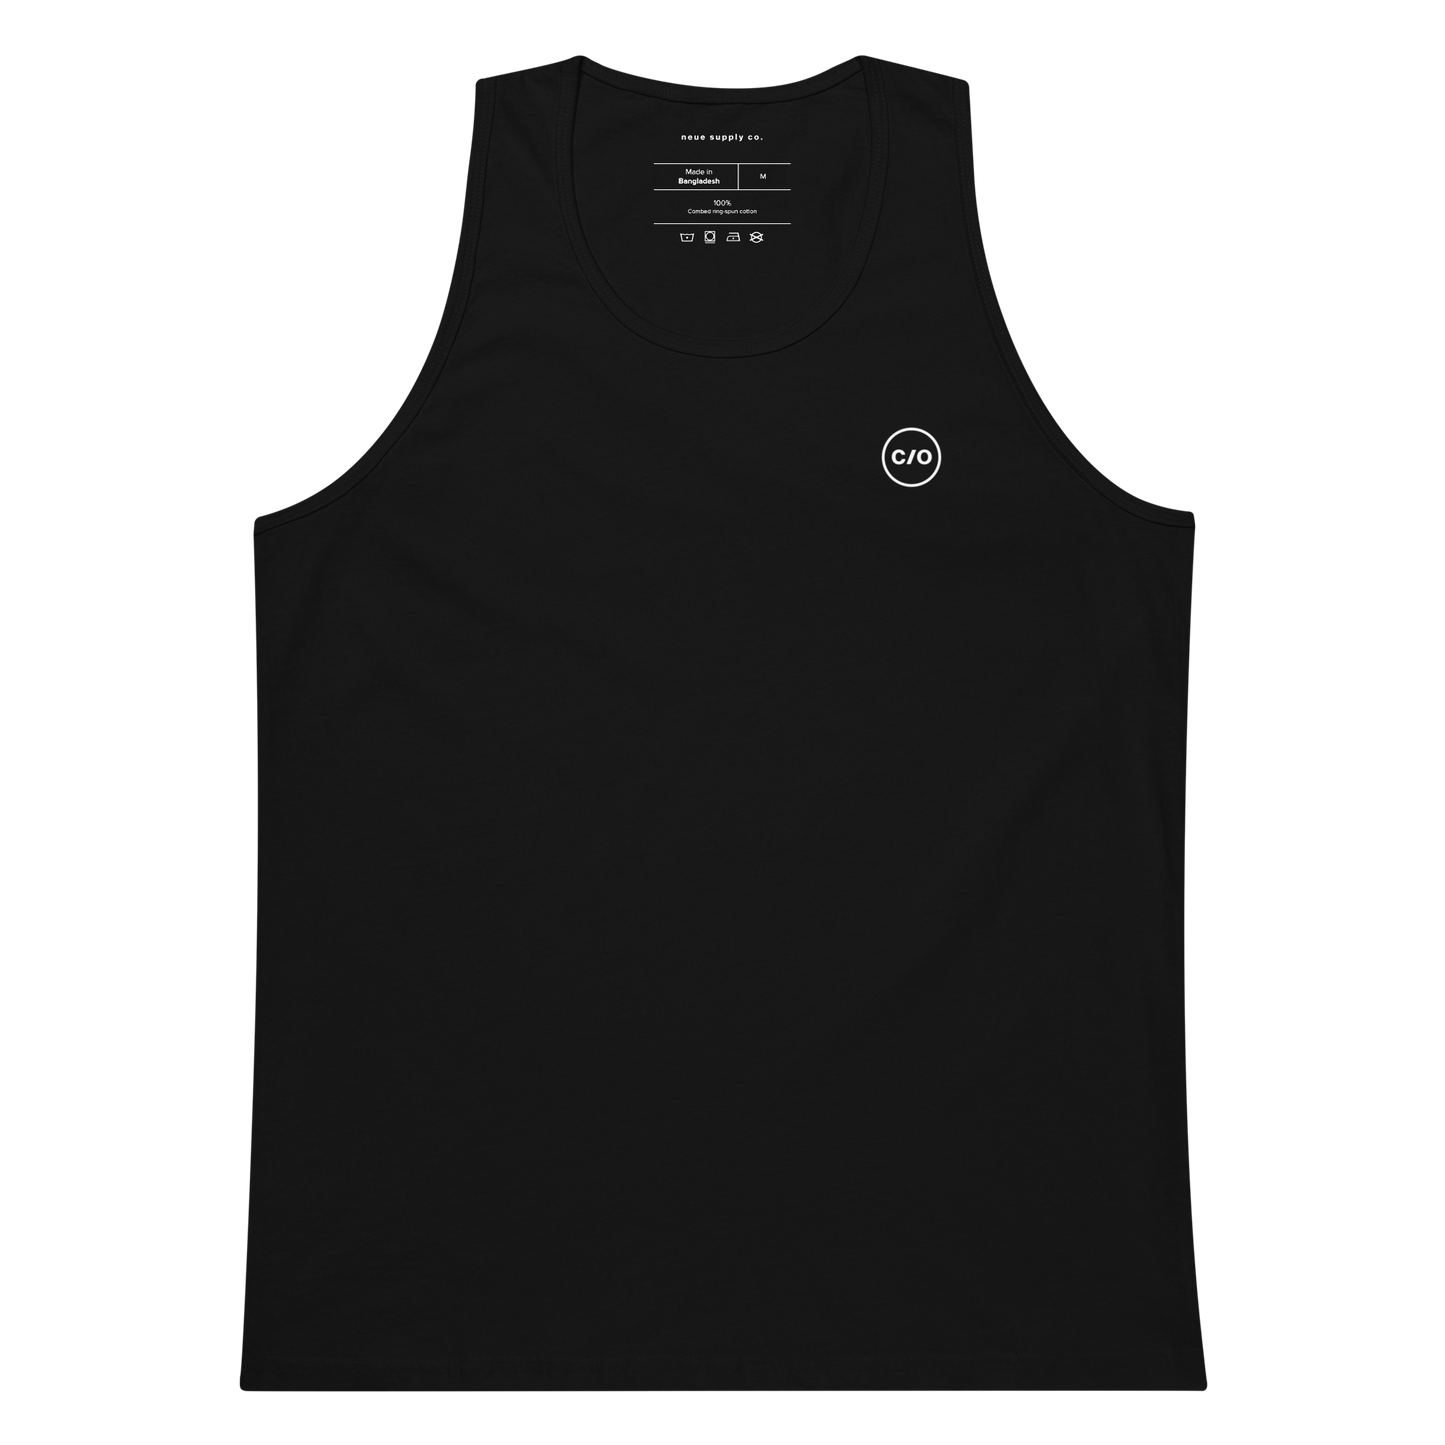 Neue Supply Co. Essential Workout Tank Top for Men in Black flat view